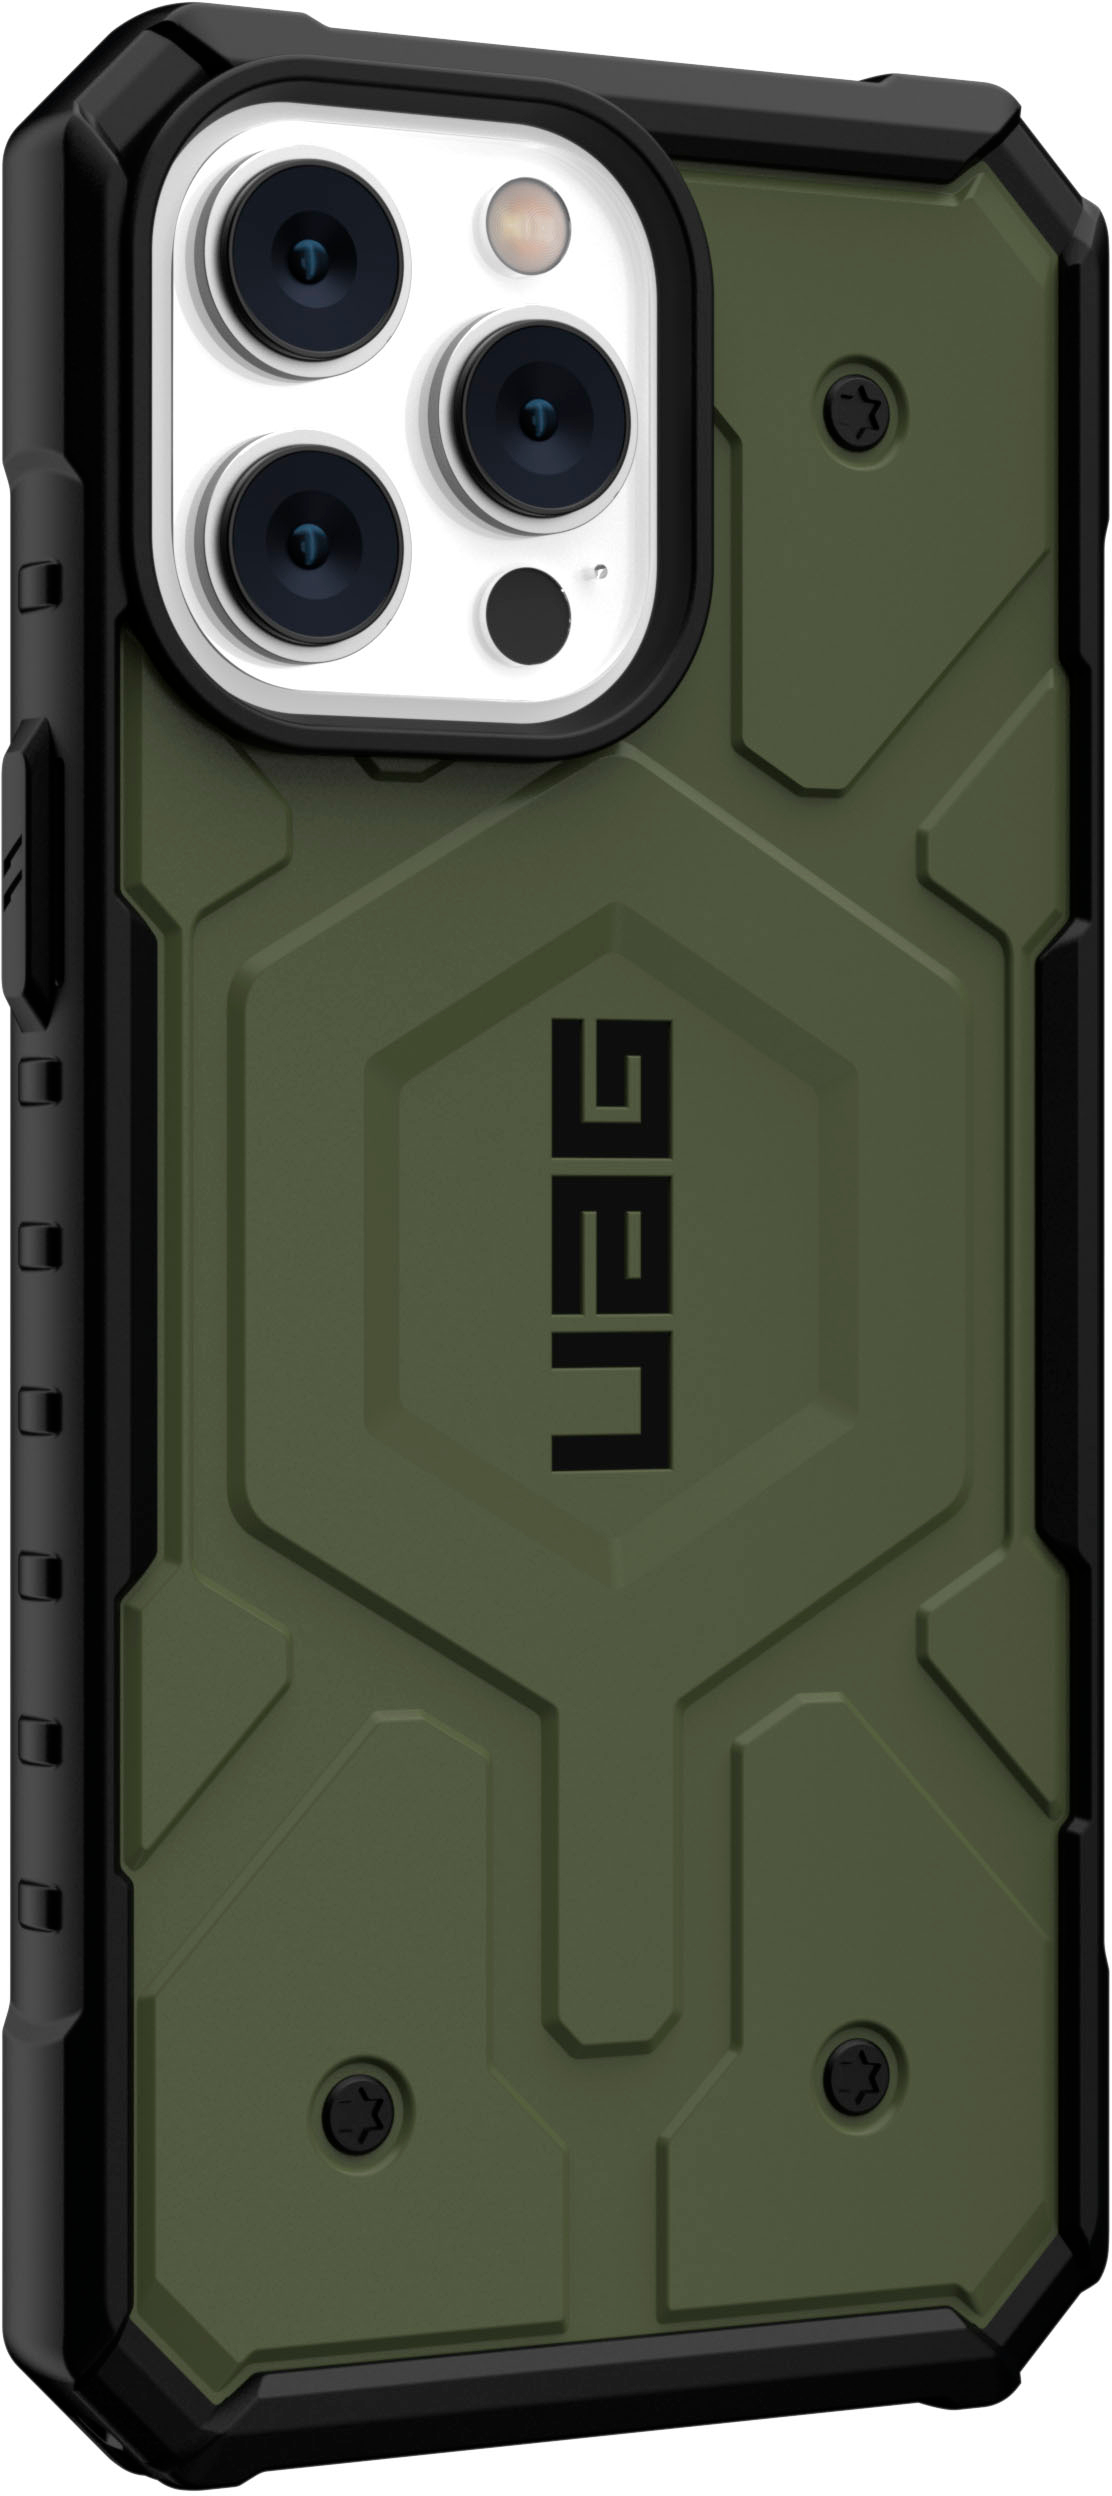 UAG Pathfinder Series Case with Magsafe for iPhone 14 Pro Max White  114055124141 - Best Buy